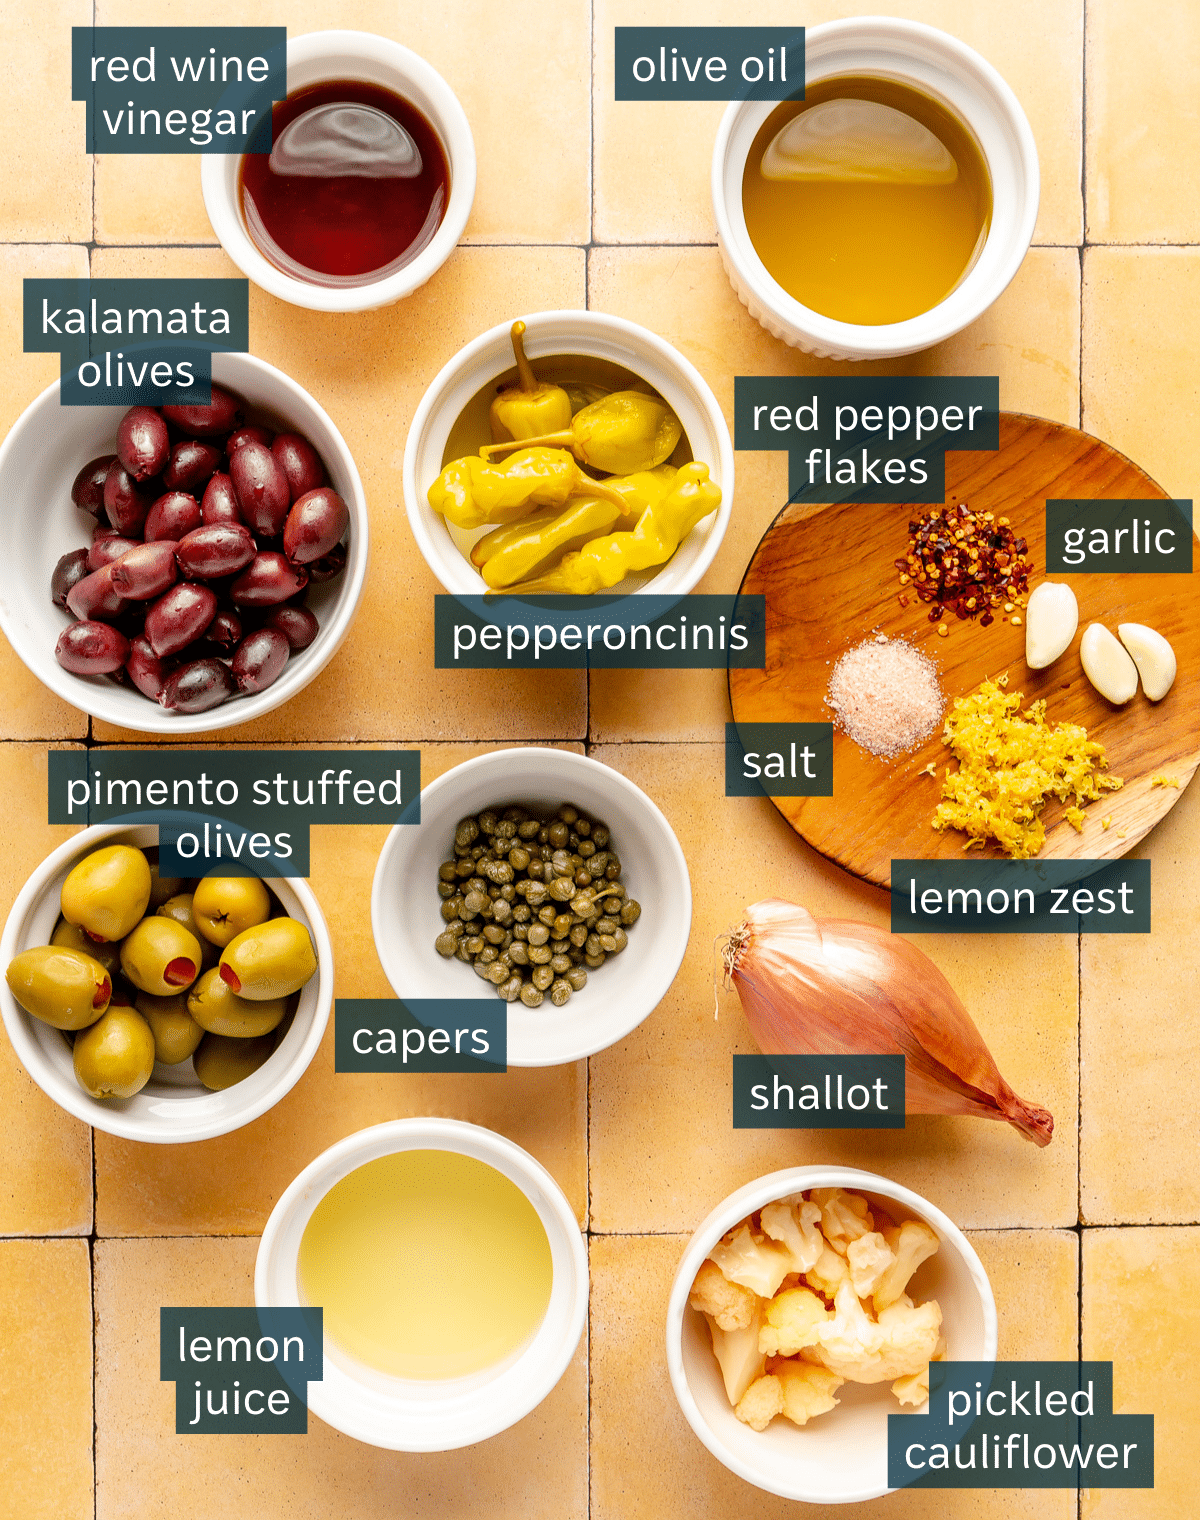 Ingredients for olive tapenade sit in a variety of bowls on a yellow tiled surface.